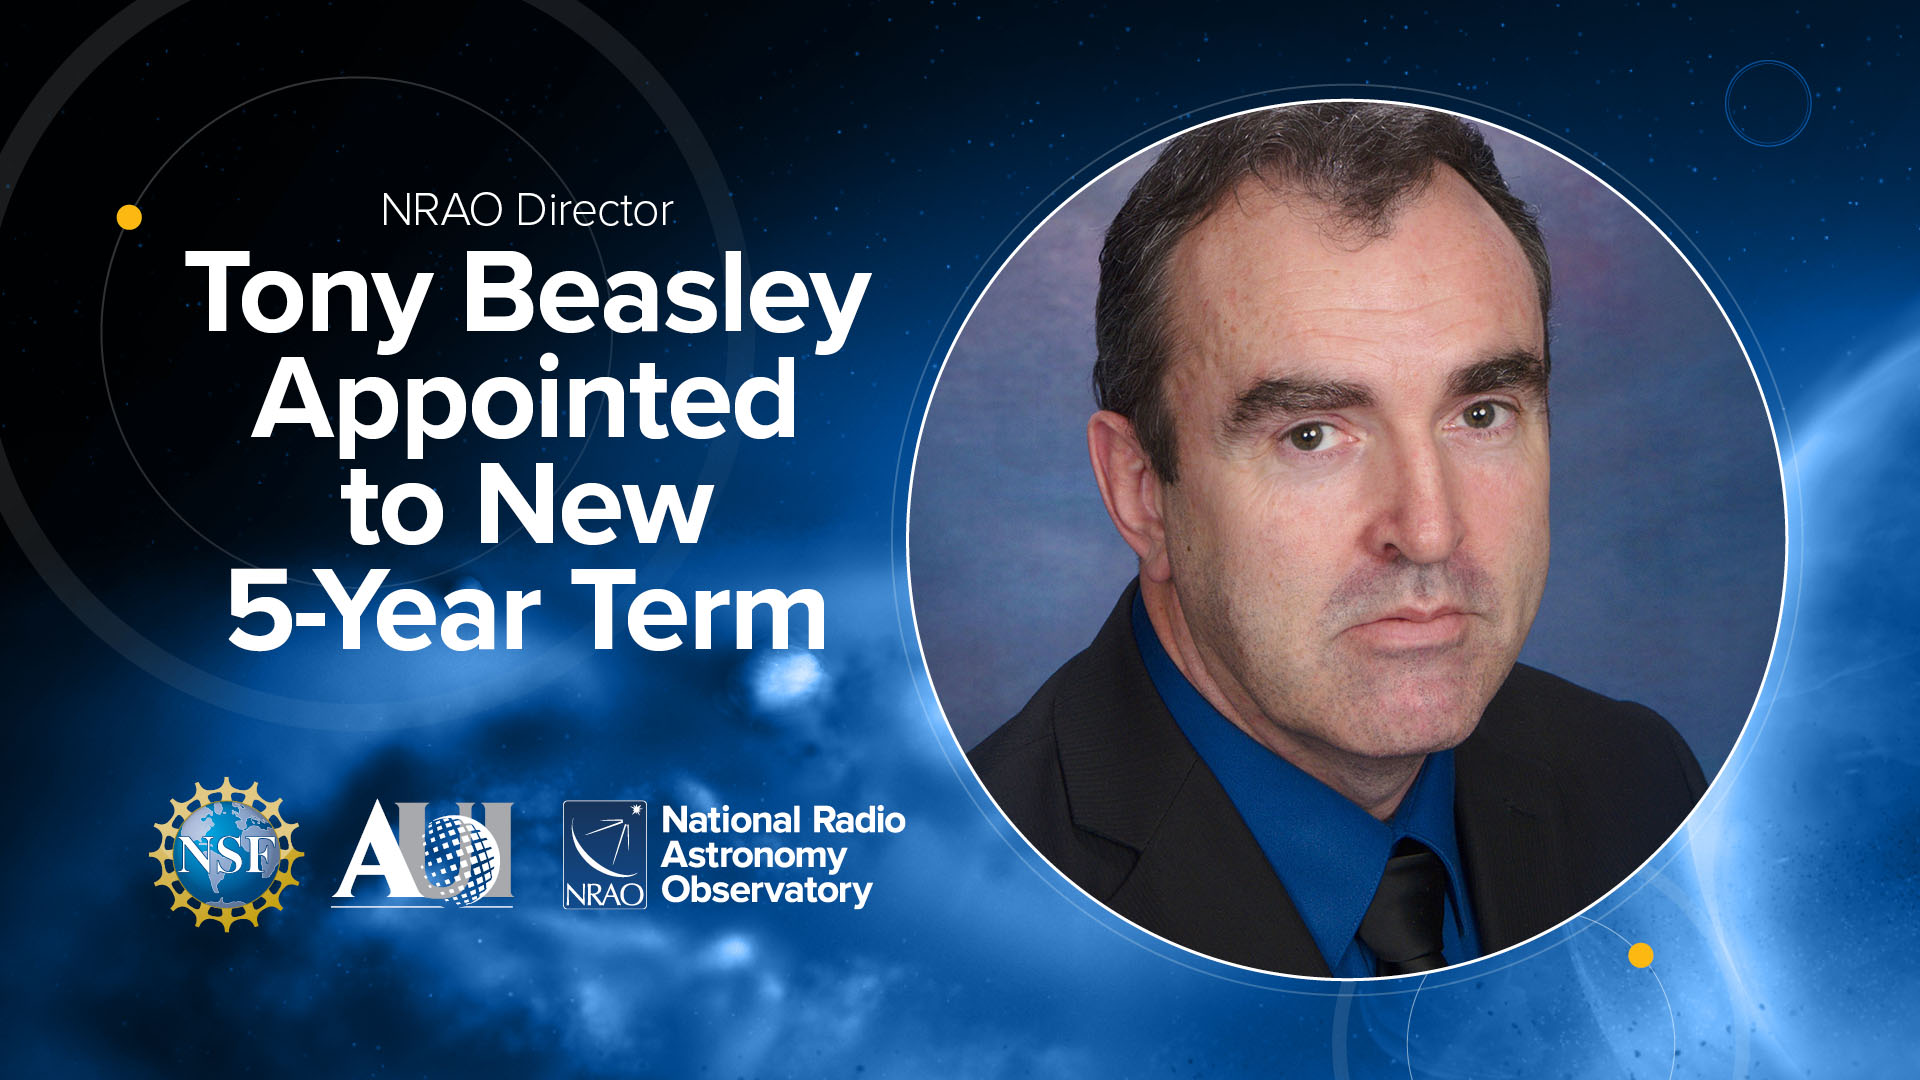 NRAO Director Tony Beasley Appointed to New Five-Year Term